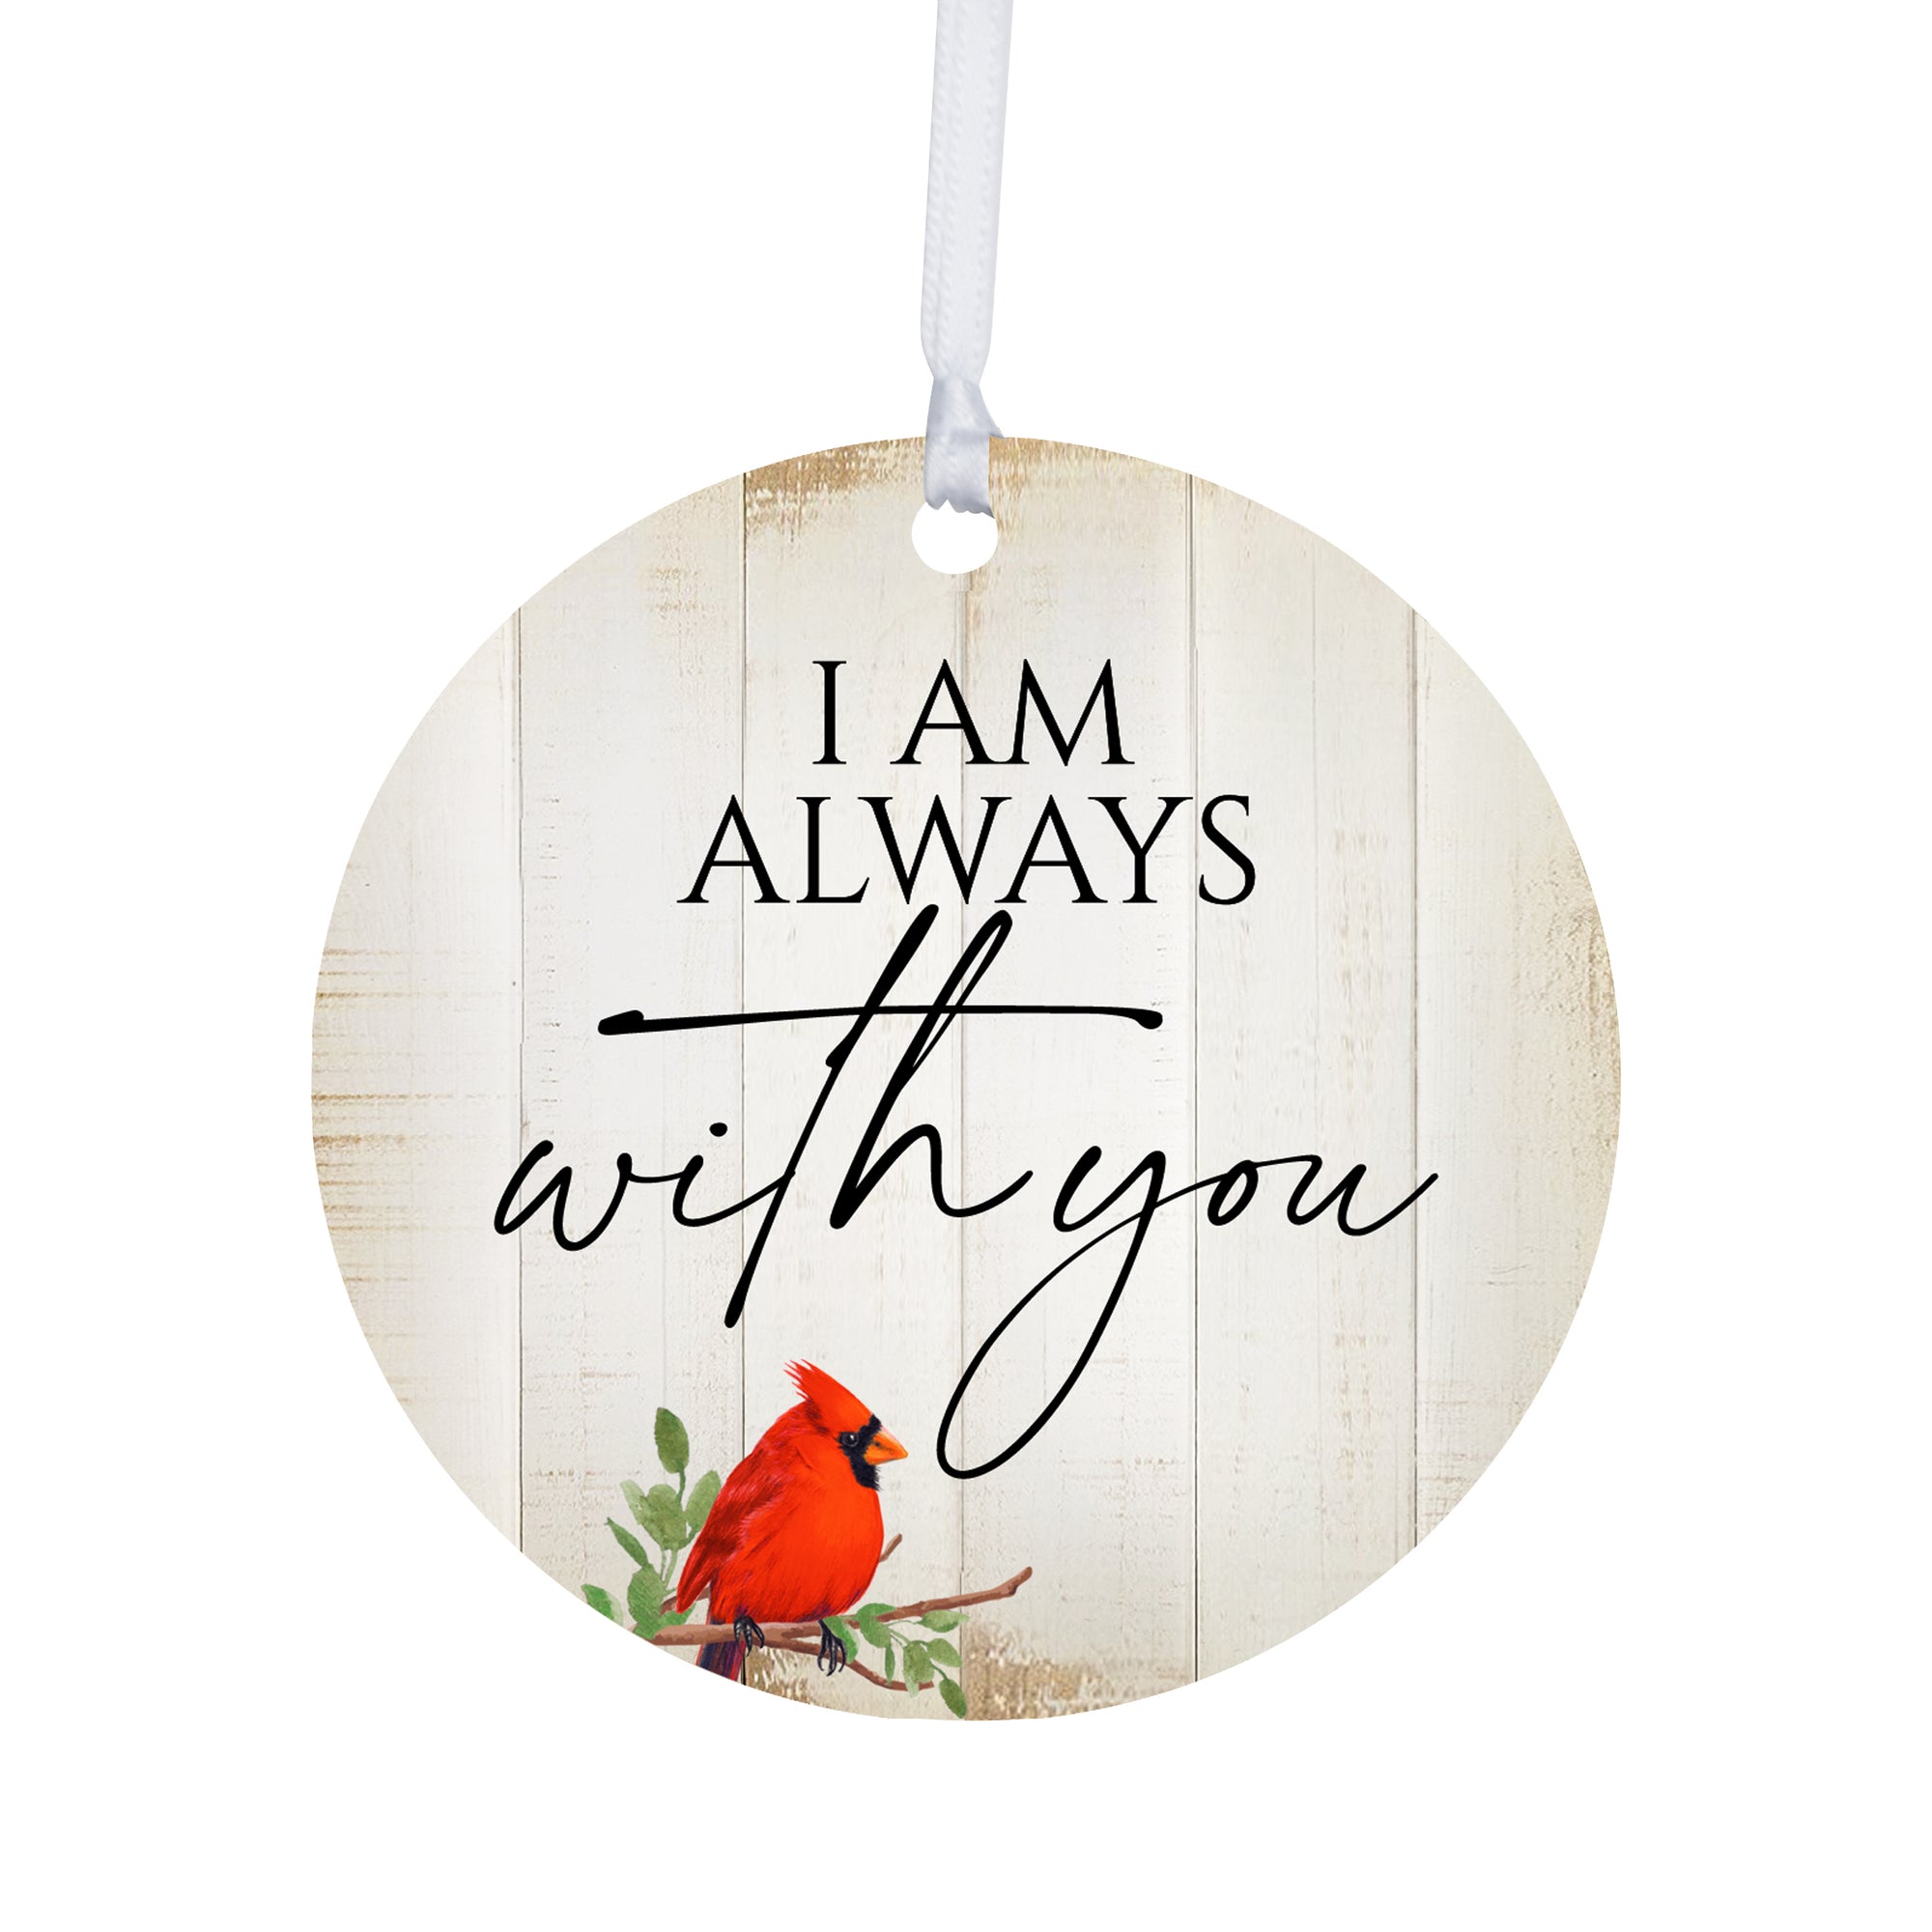 Vintage-Inspired Cardinal Ornament With Everyday Verses Gift Ideas - I Am Always